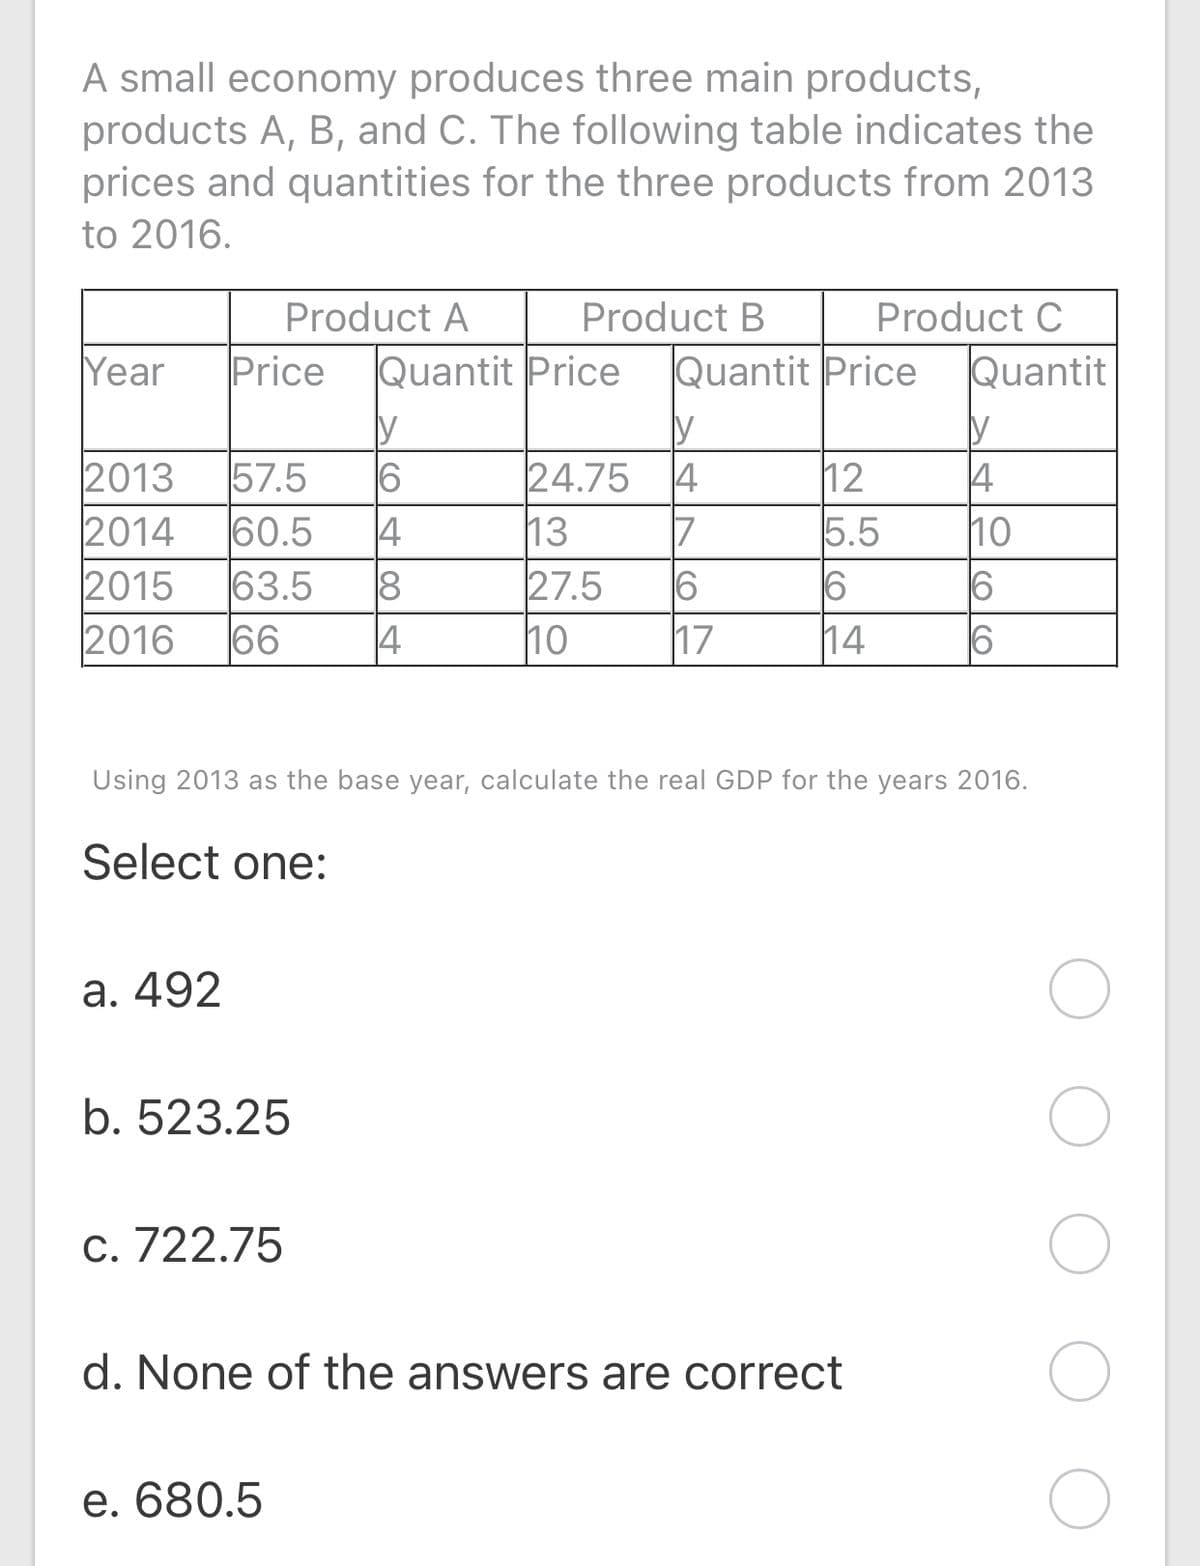 A small economy produces three main products,
products A, B, and C. The following table indicates the
prices and quantities for the three products from 2013
to 2016.
Product A
Product B
Product C
Year
Price
Quantit Price
Quantit Price
Quantit
2013
57.5
60.5
24.75 4
12
5.5
6
14
6
4
2014
2015
2016
4
63.5
66
13
7
10
6
27.5
4
10
17
Using 2013 as the base year, calculate the real GDP for the years 2016.
Select one:
а. 492
b. 523.25
C. 722.75
d. None of the answers are correct
e. 680.5
O CO
